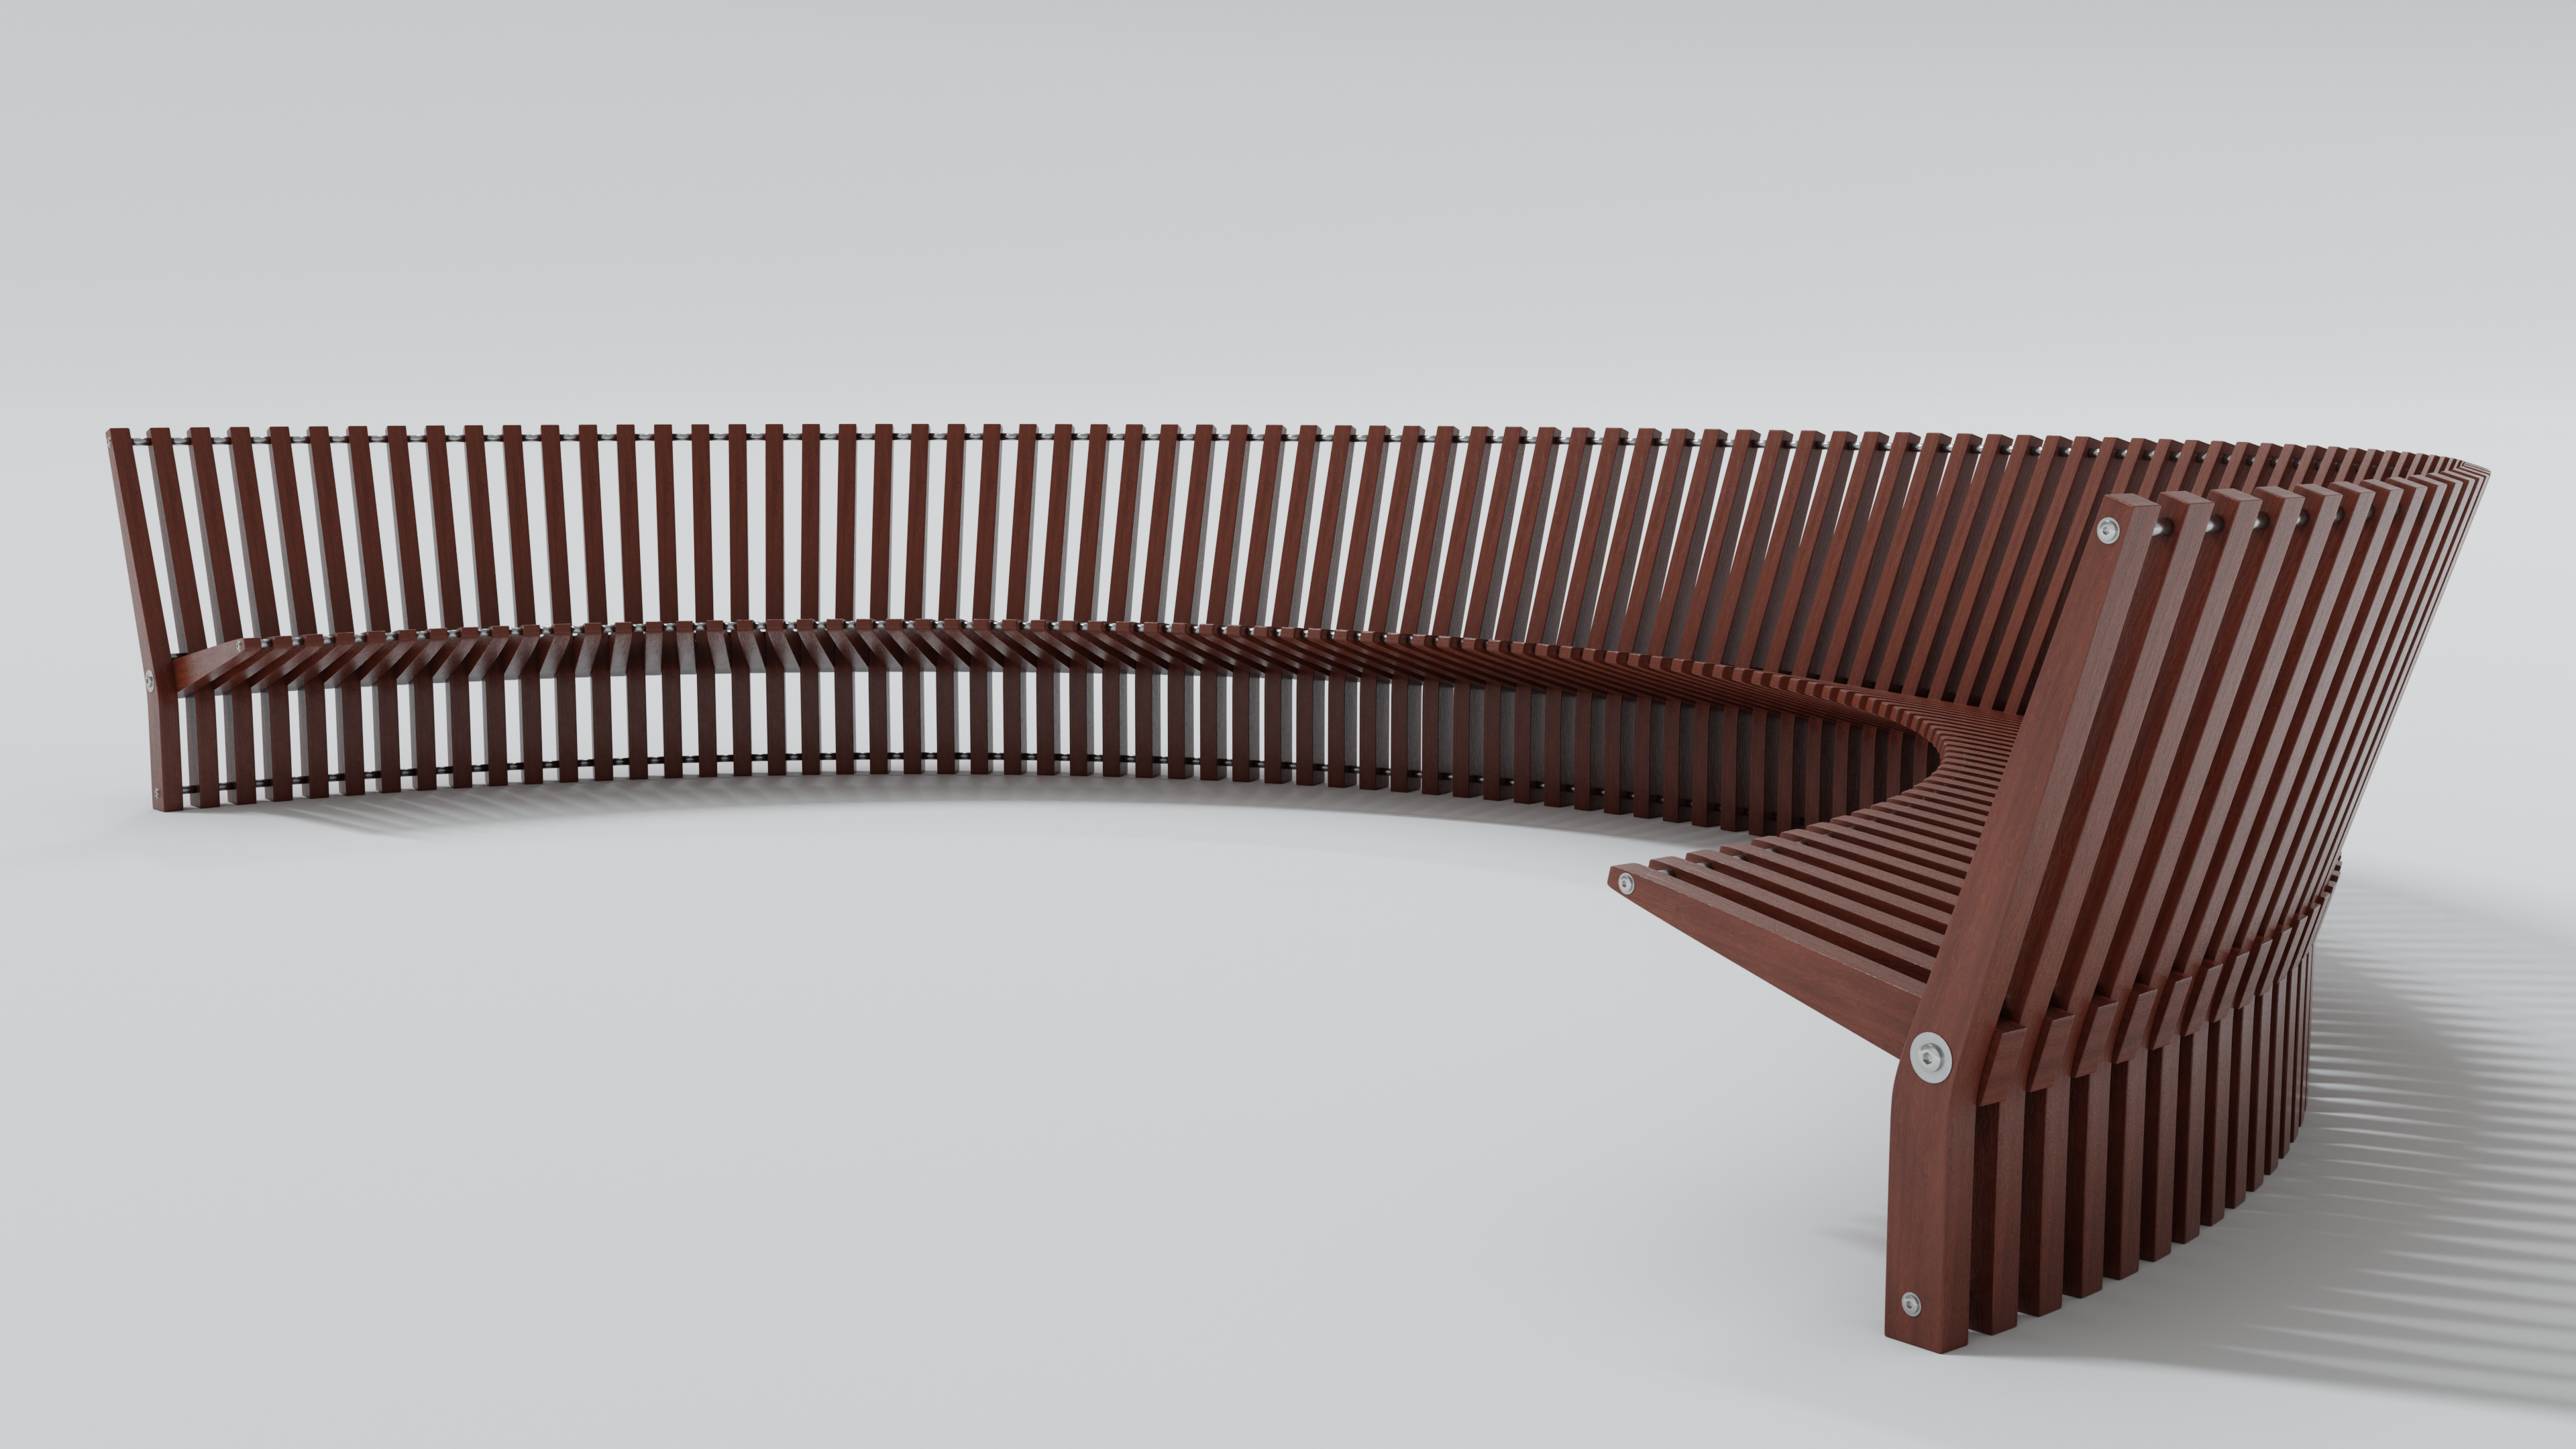 Astral - bench by Per Borre preview image 1